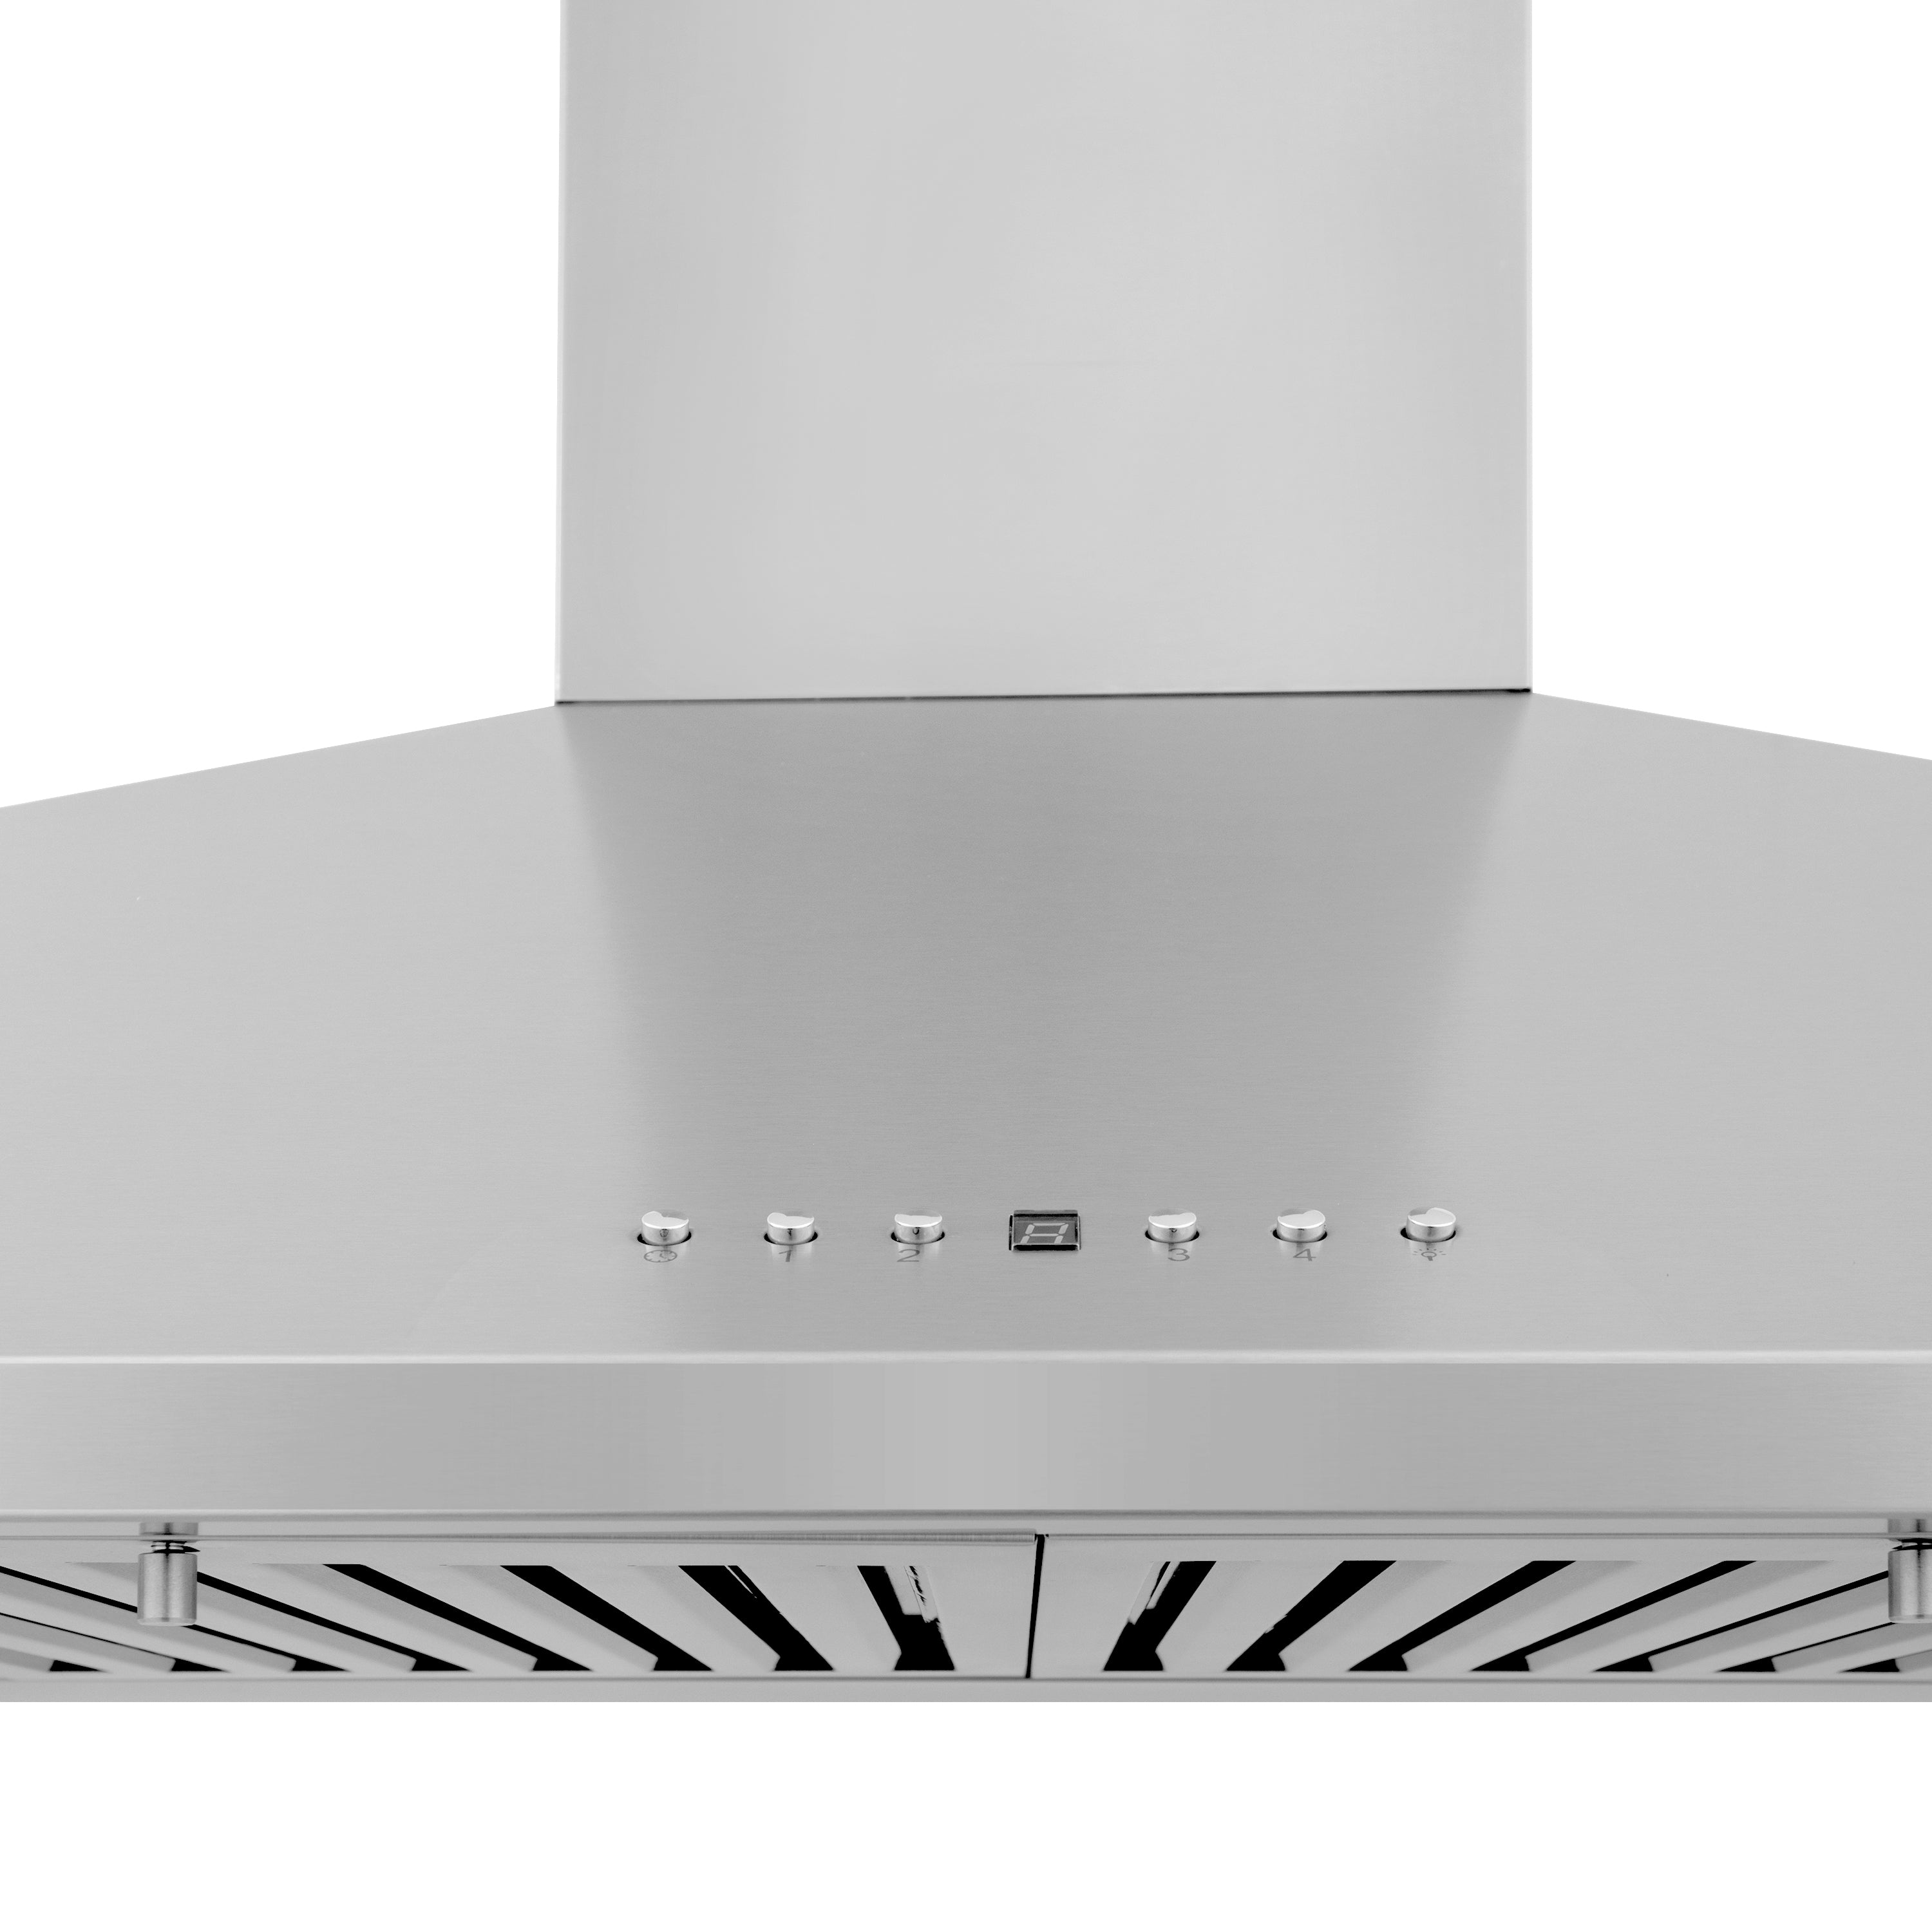 48" ZLINE CrownSound‚ Ducted Vent Wall Mount Range Hood in Stainless Steel with Built-in Bluetooth Speakers (KL2CRN-BT-48)